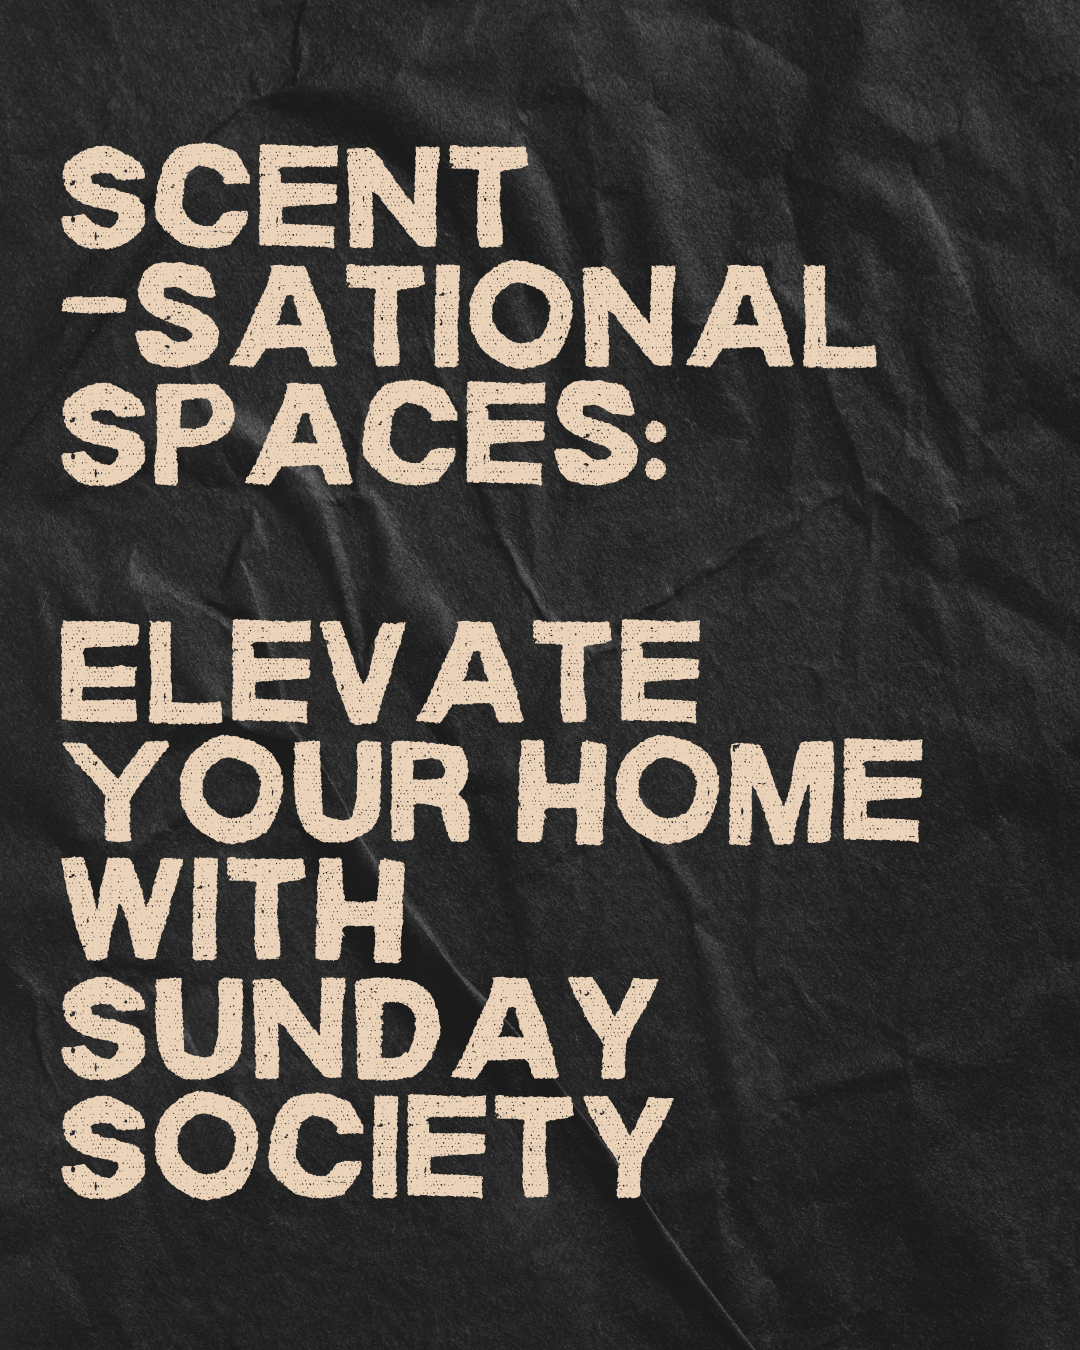 Scent-sational Spaces: Elevate your home with Sunday Society